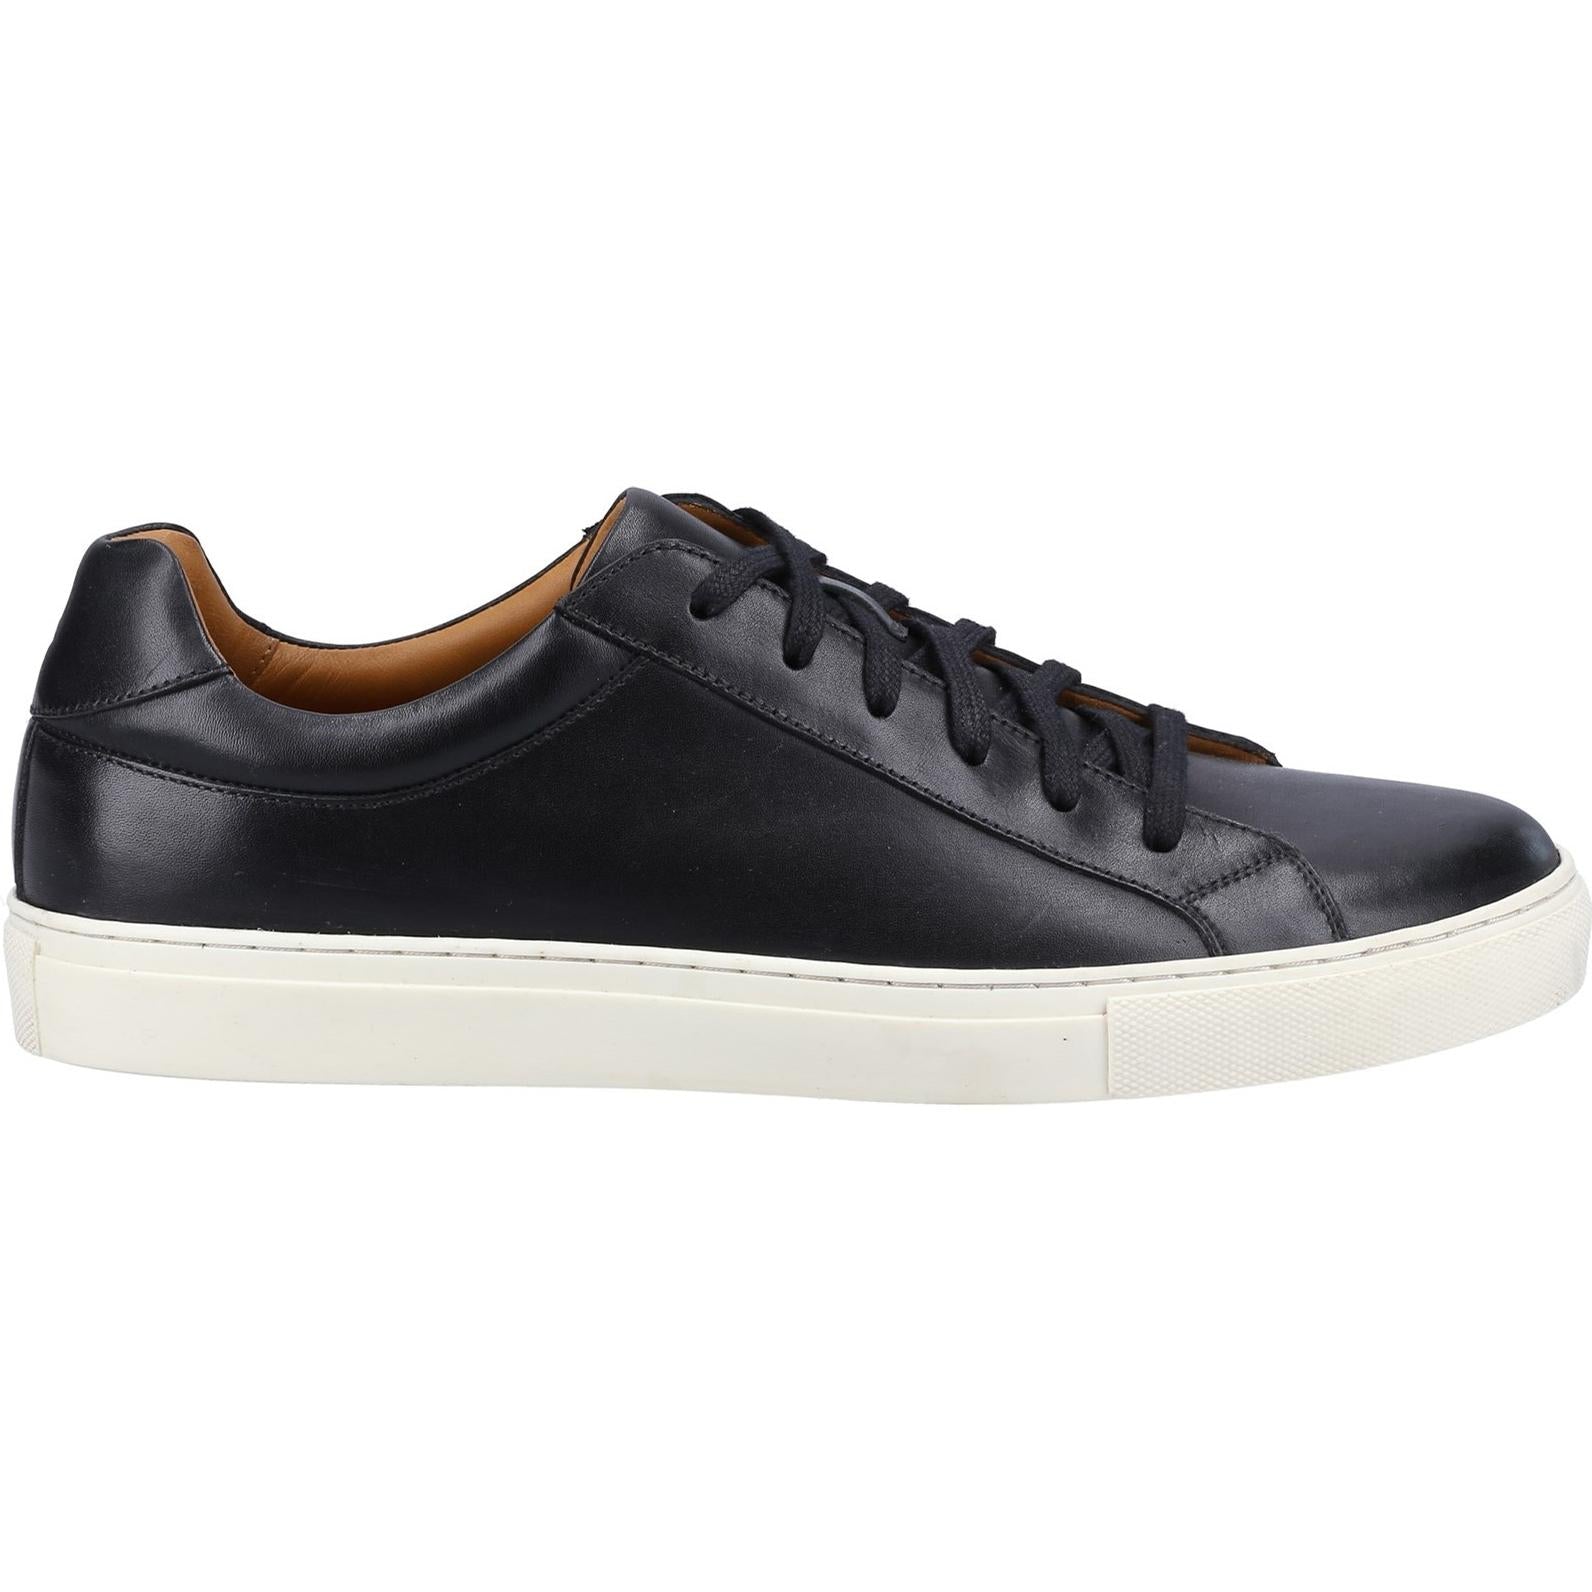 Hush Puppies Colton Cupsole Trainers